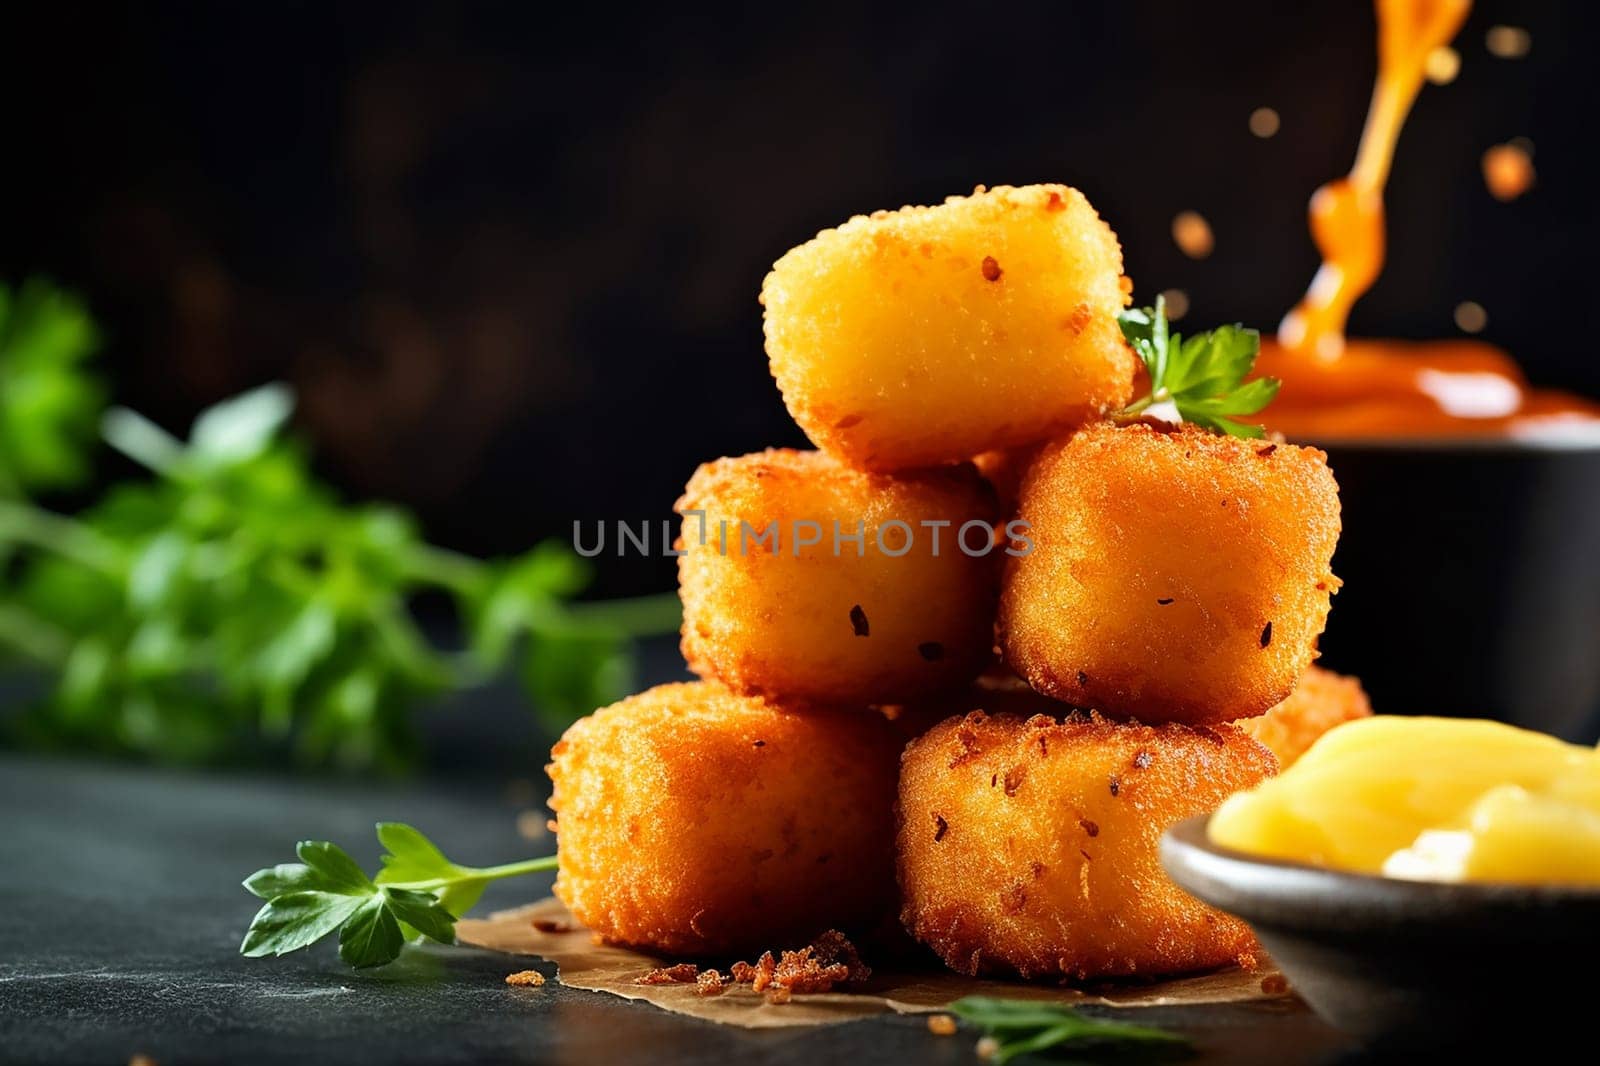 Crispy golden fried cheese cubes with dipping sauce and garnish. by Hype2art